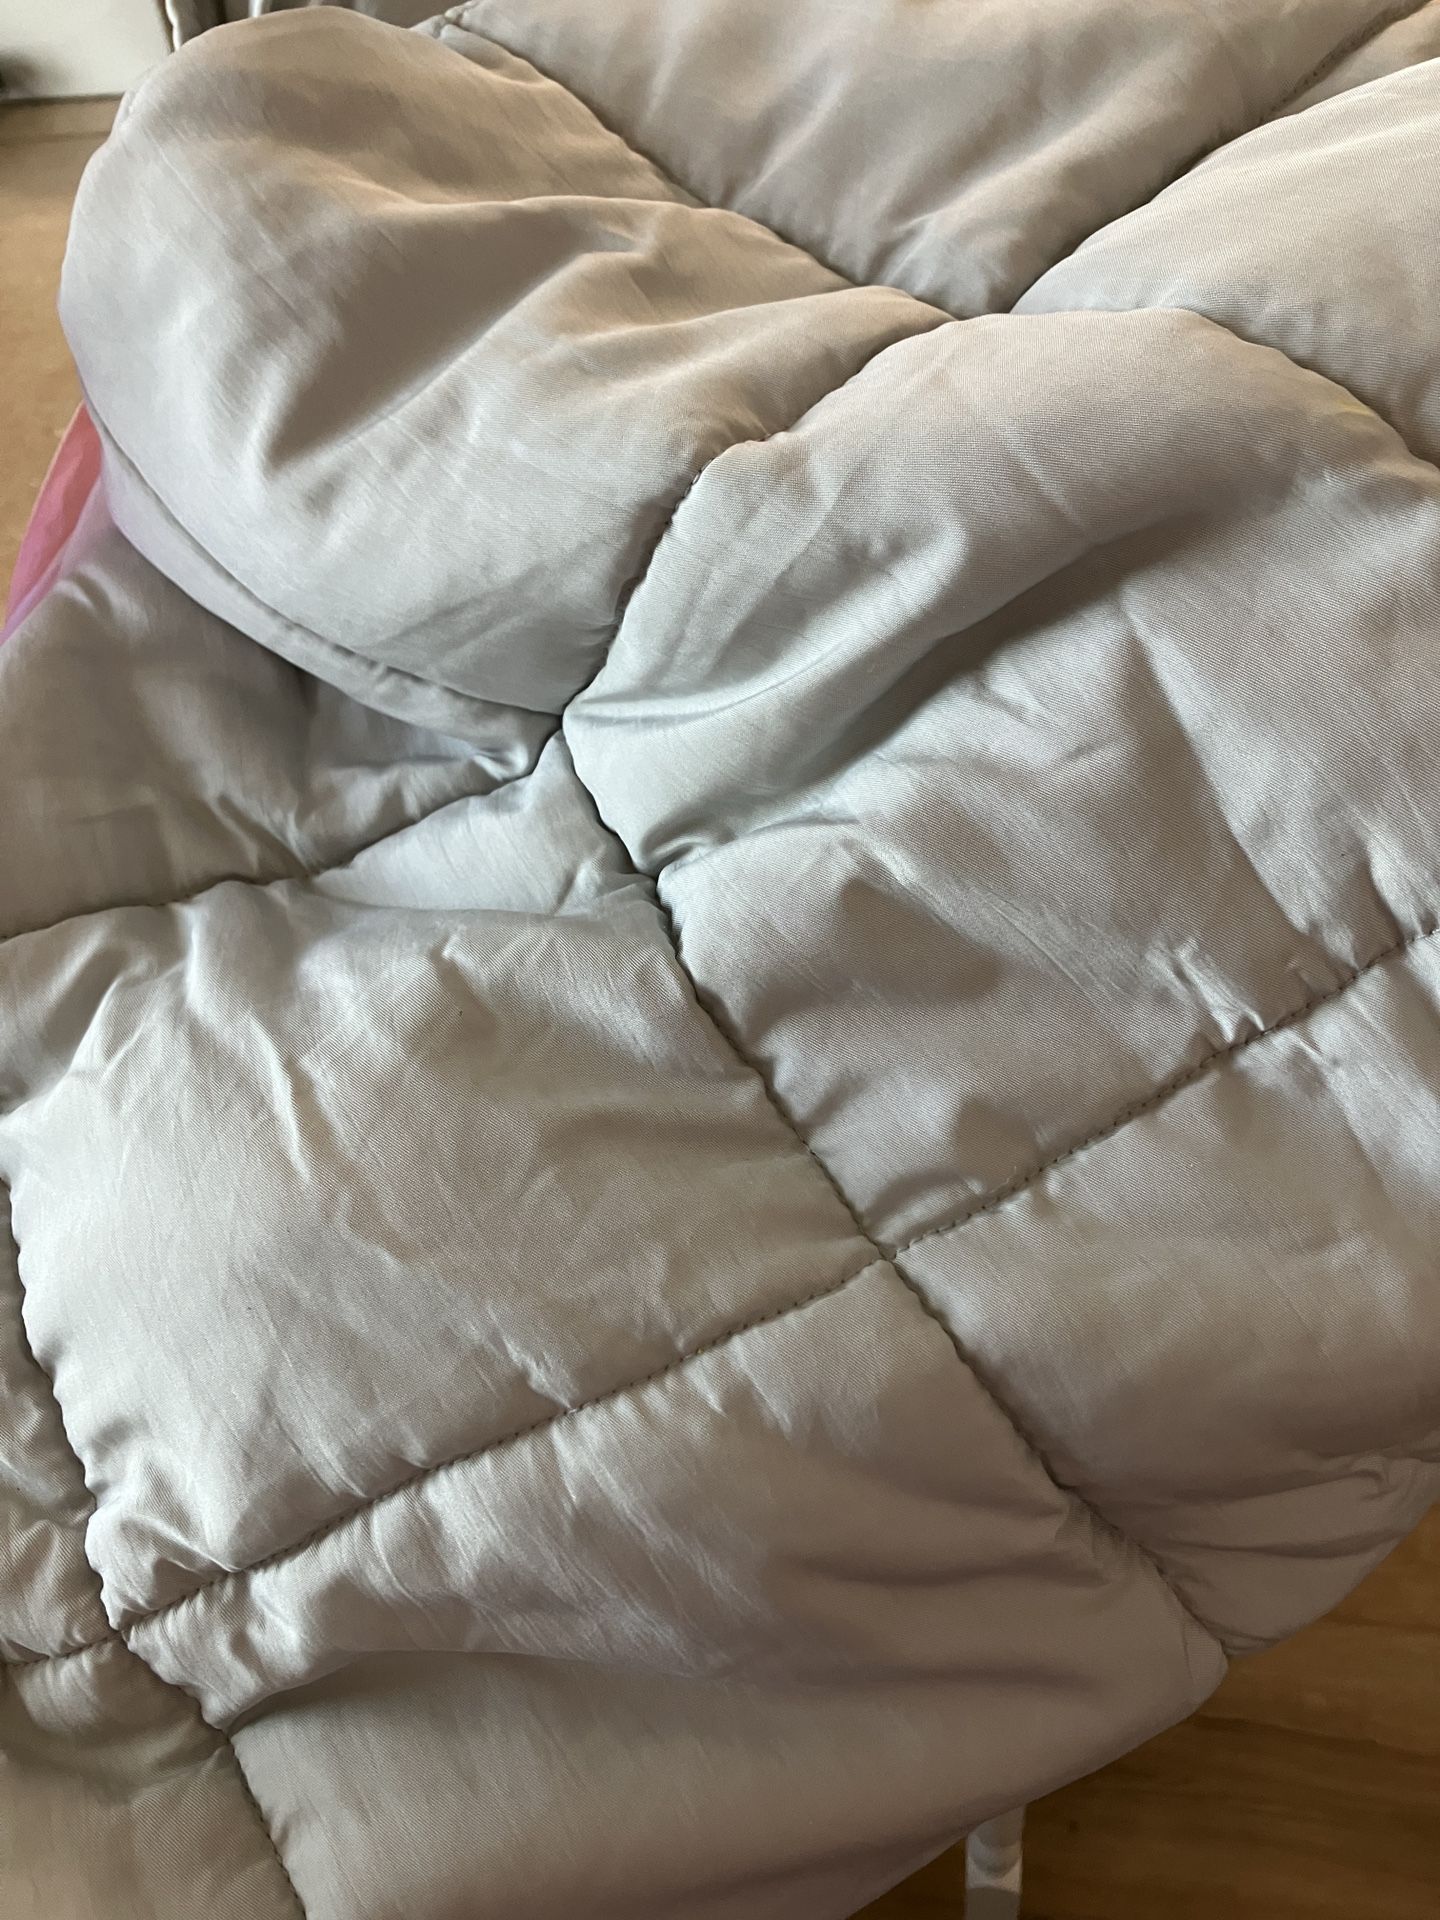 Washable Gray Weighted Blanket